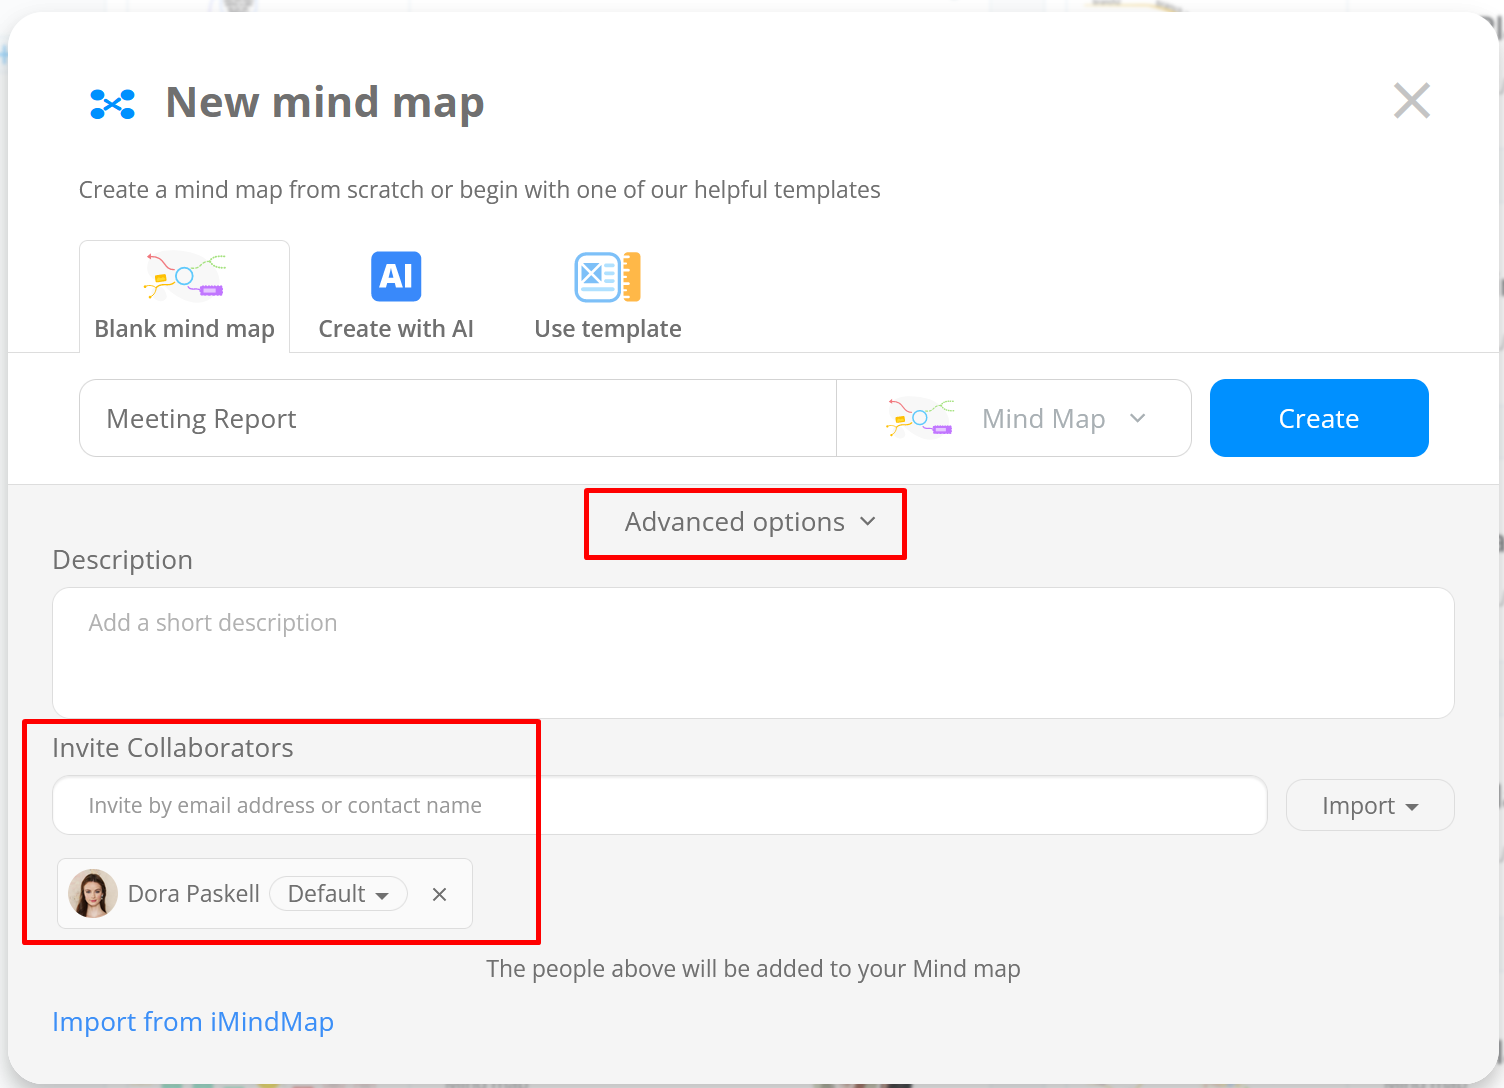  invite people to the new Mind Map under Advanced Options.